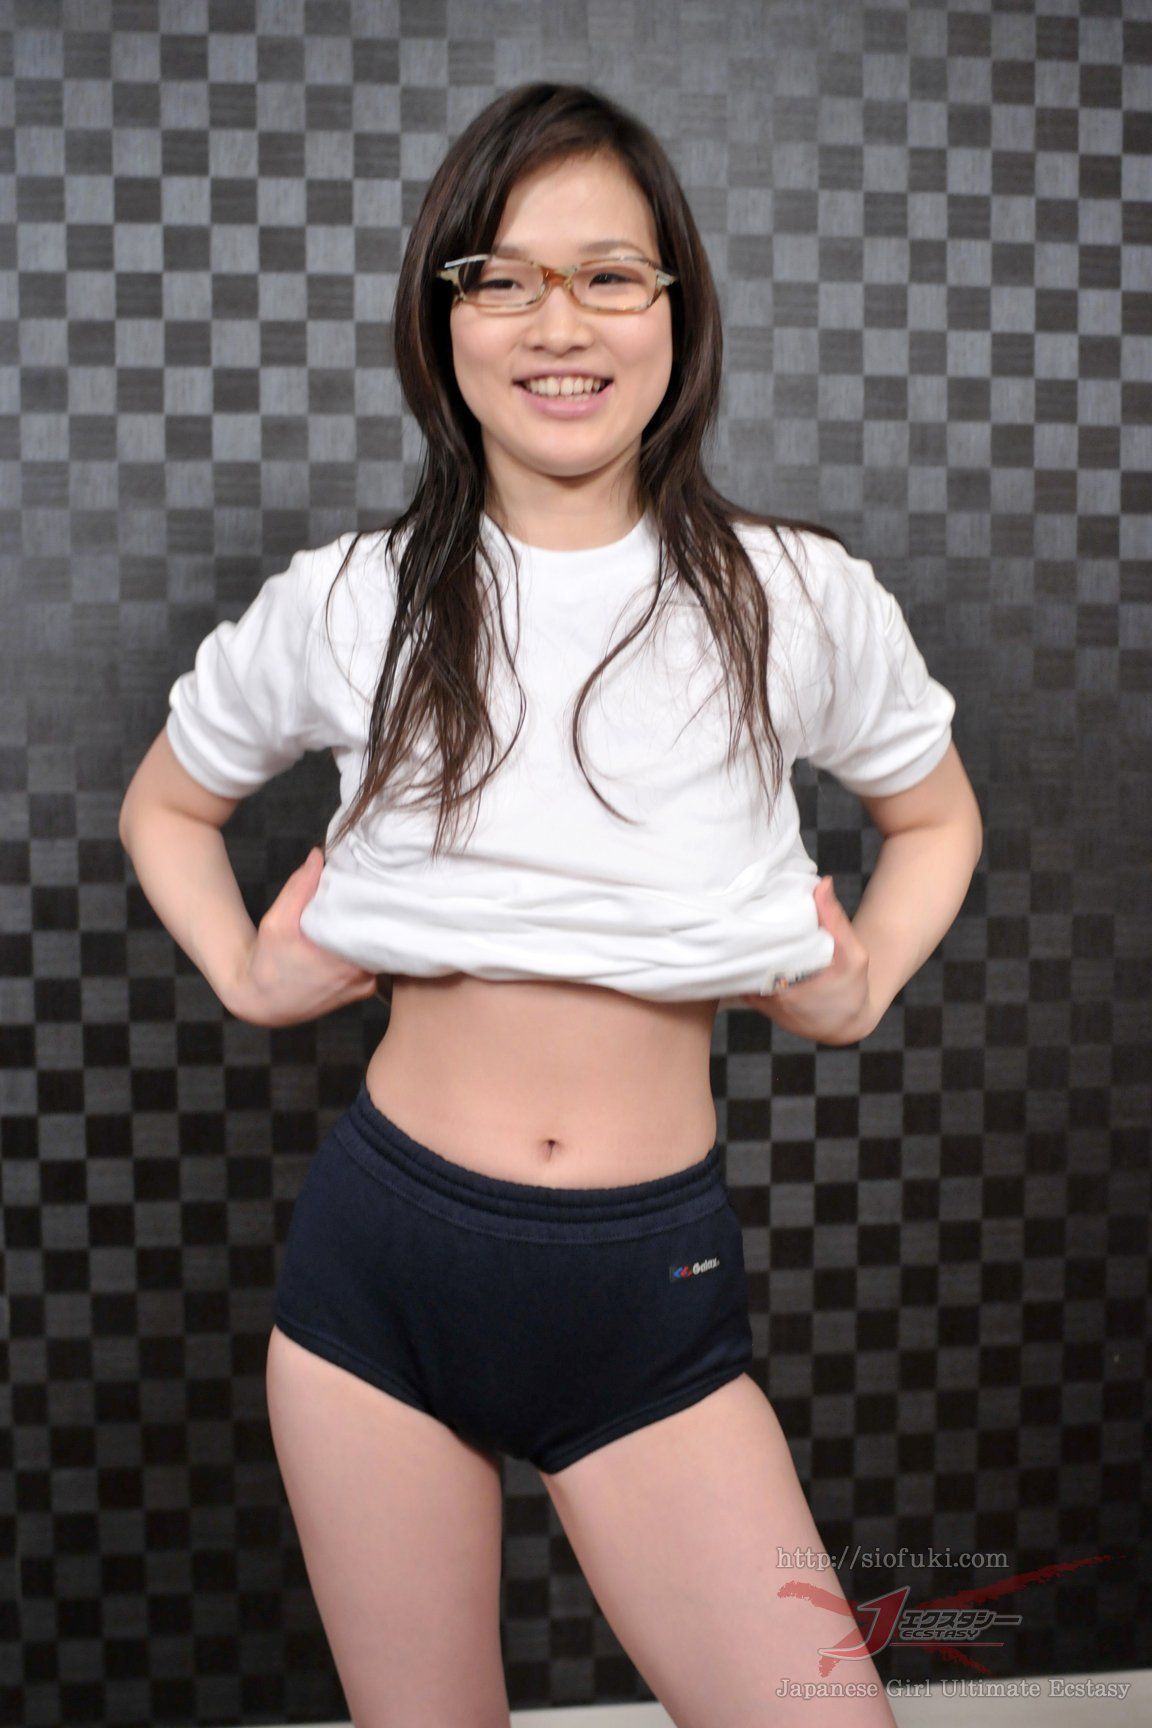 Asian girls in bloomers